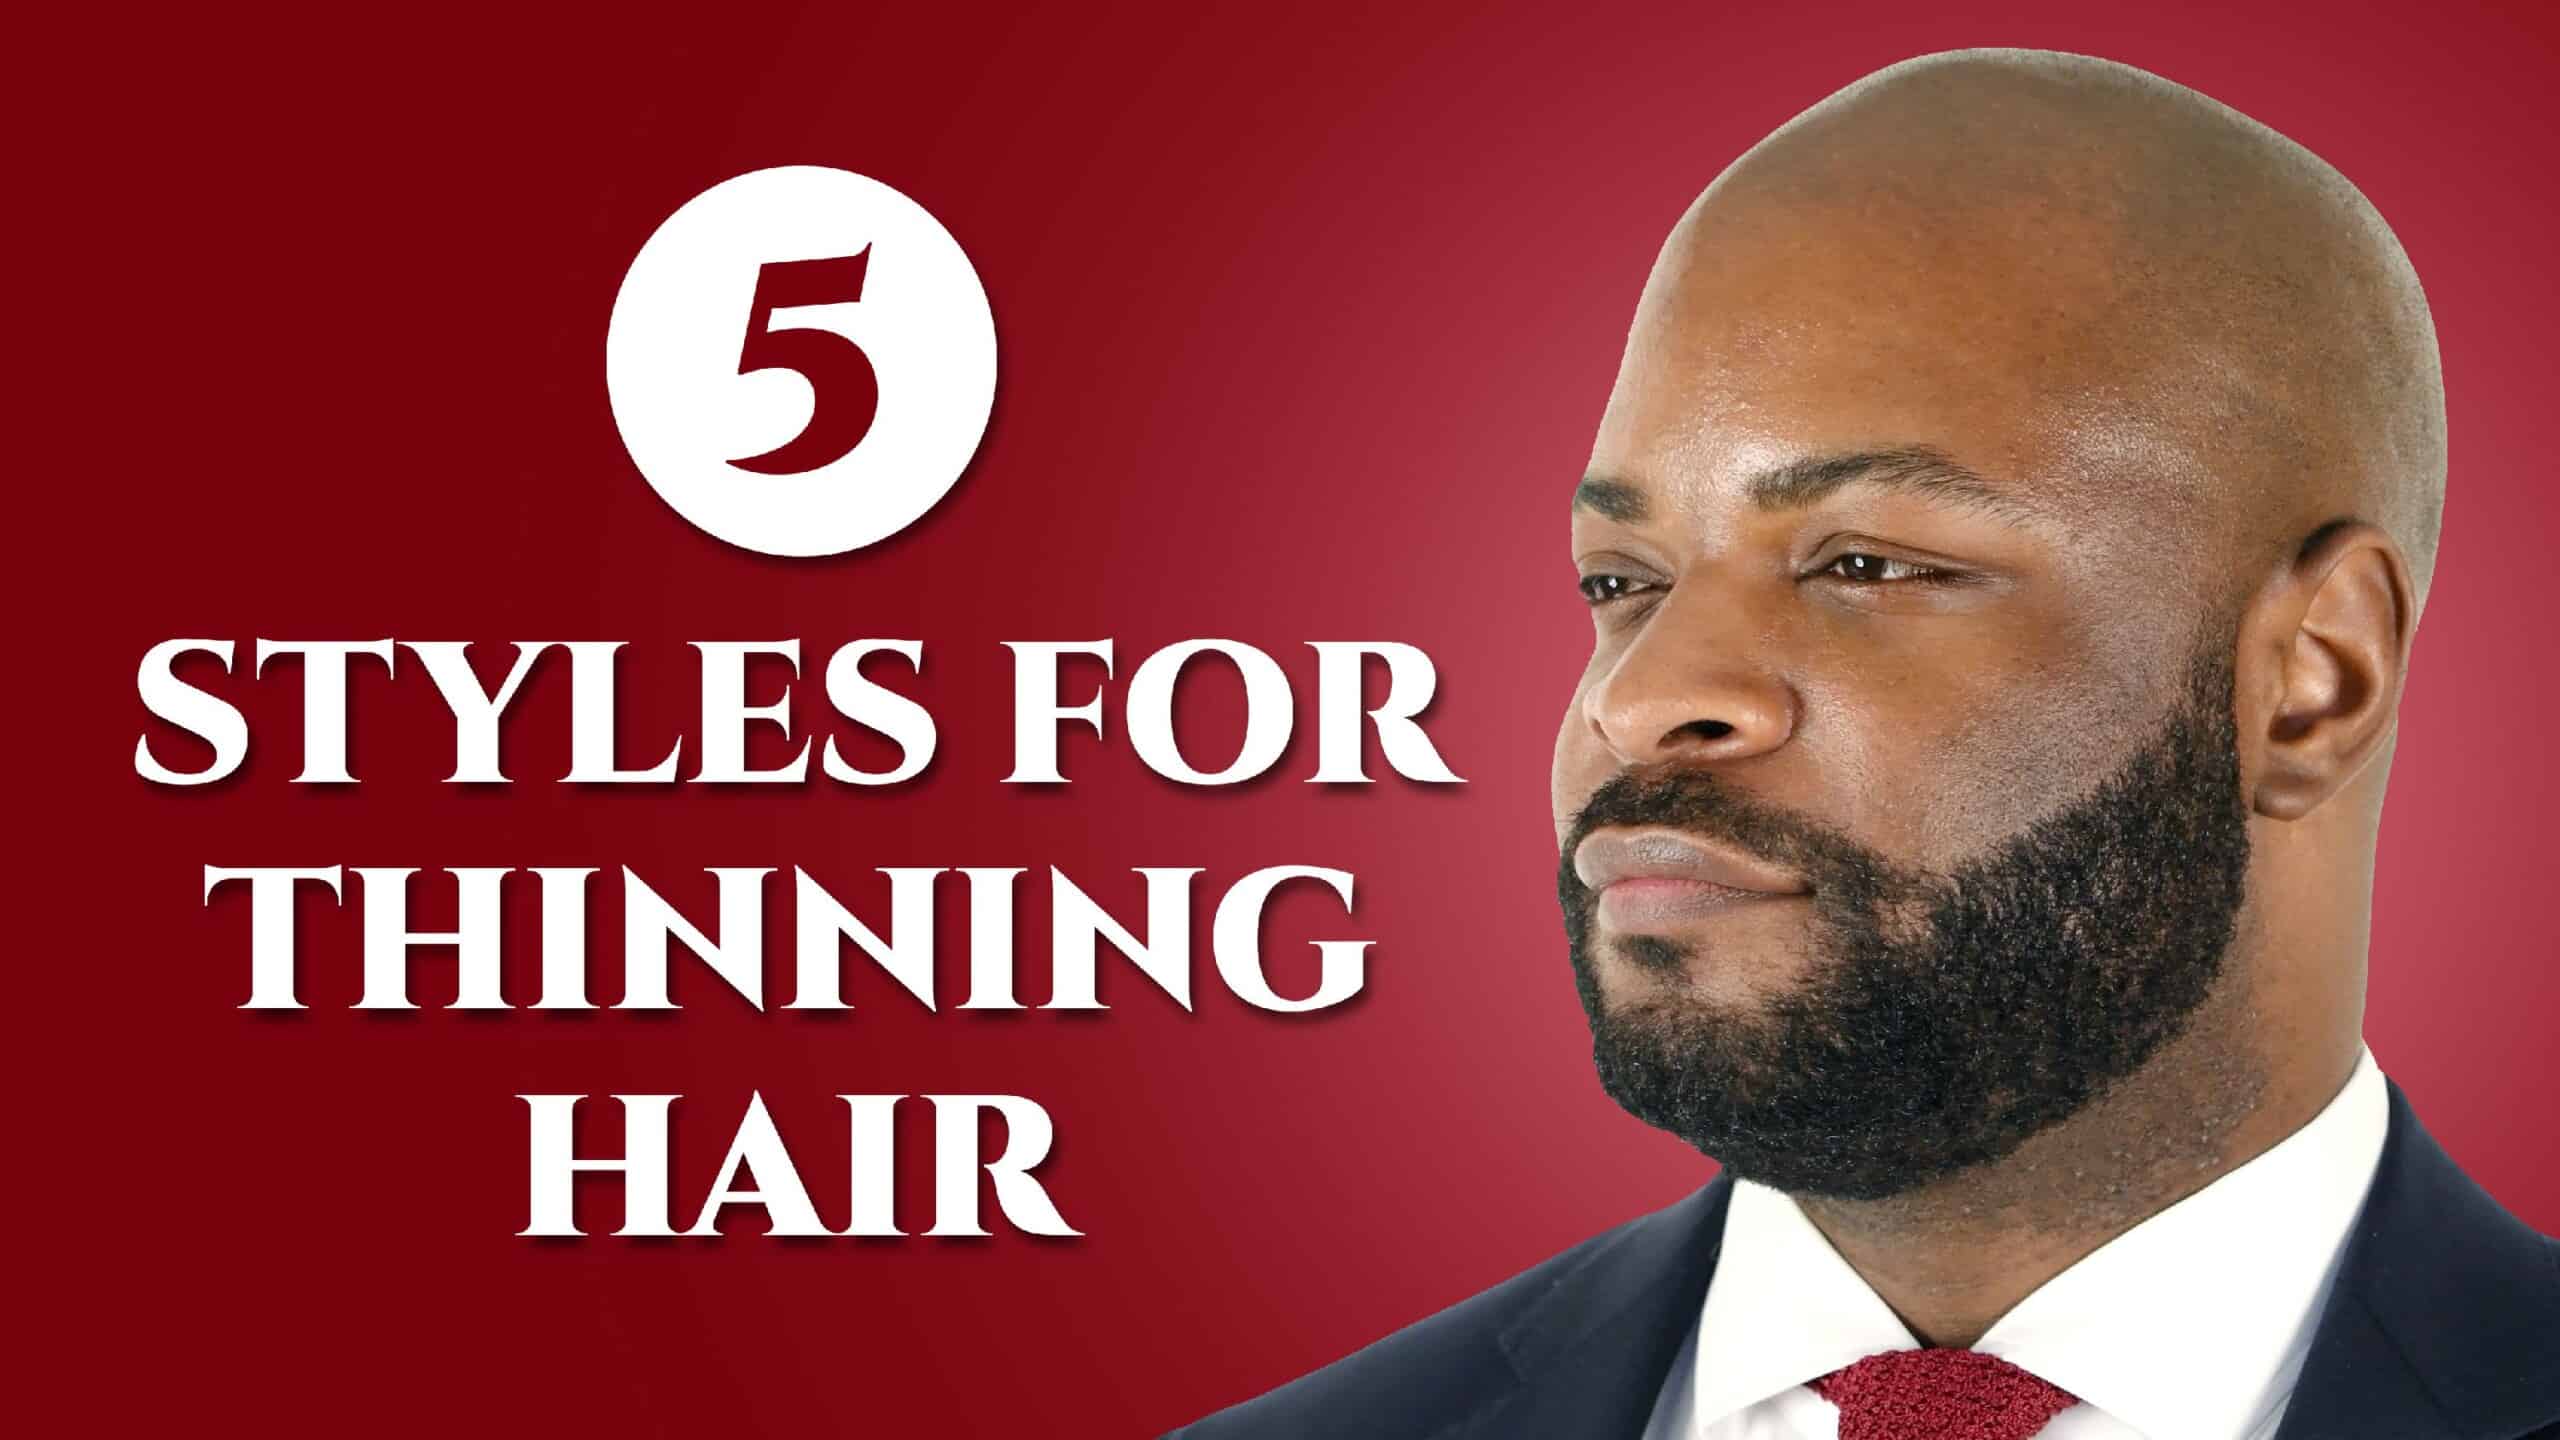 Best Hairstyles for Balding Men | The Art of Manliness